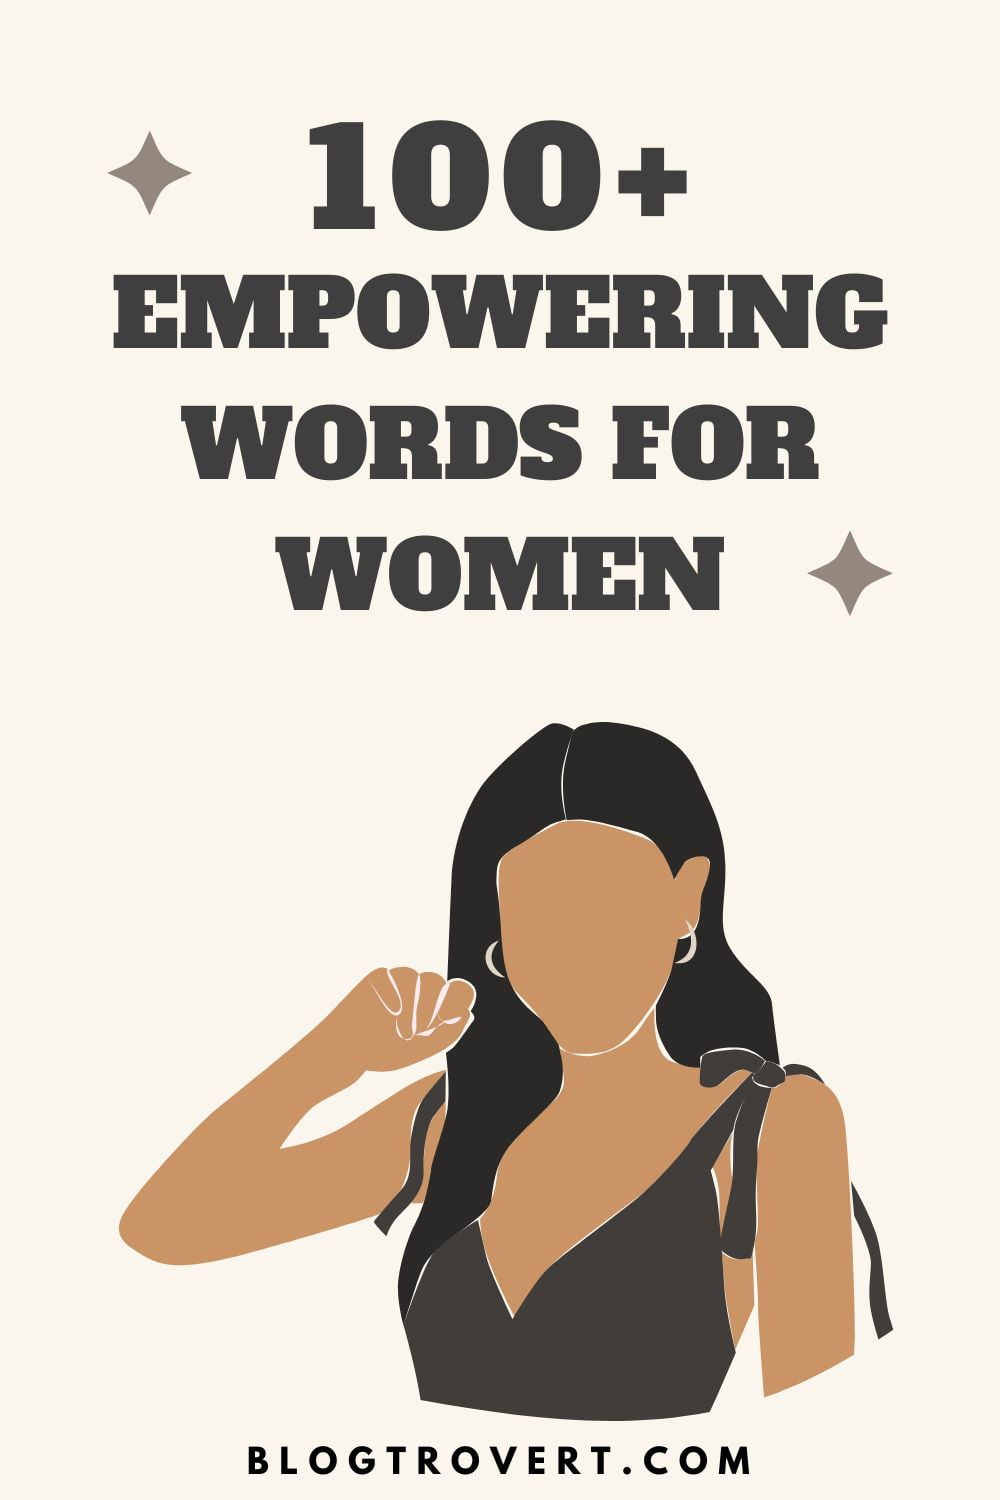 Empowering words for women